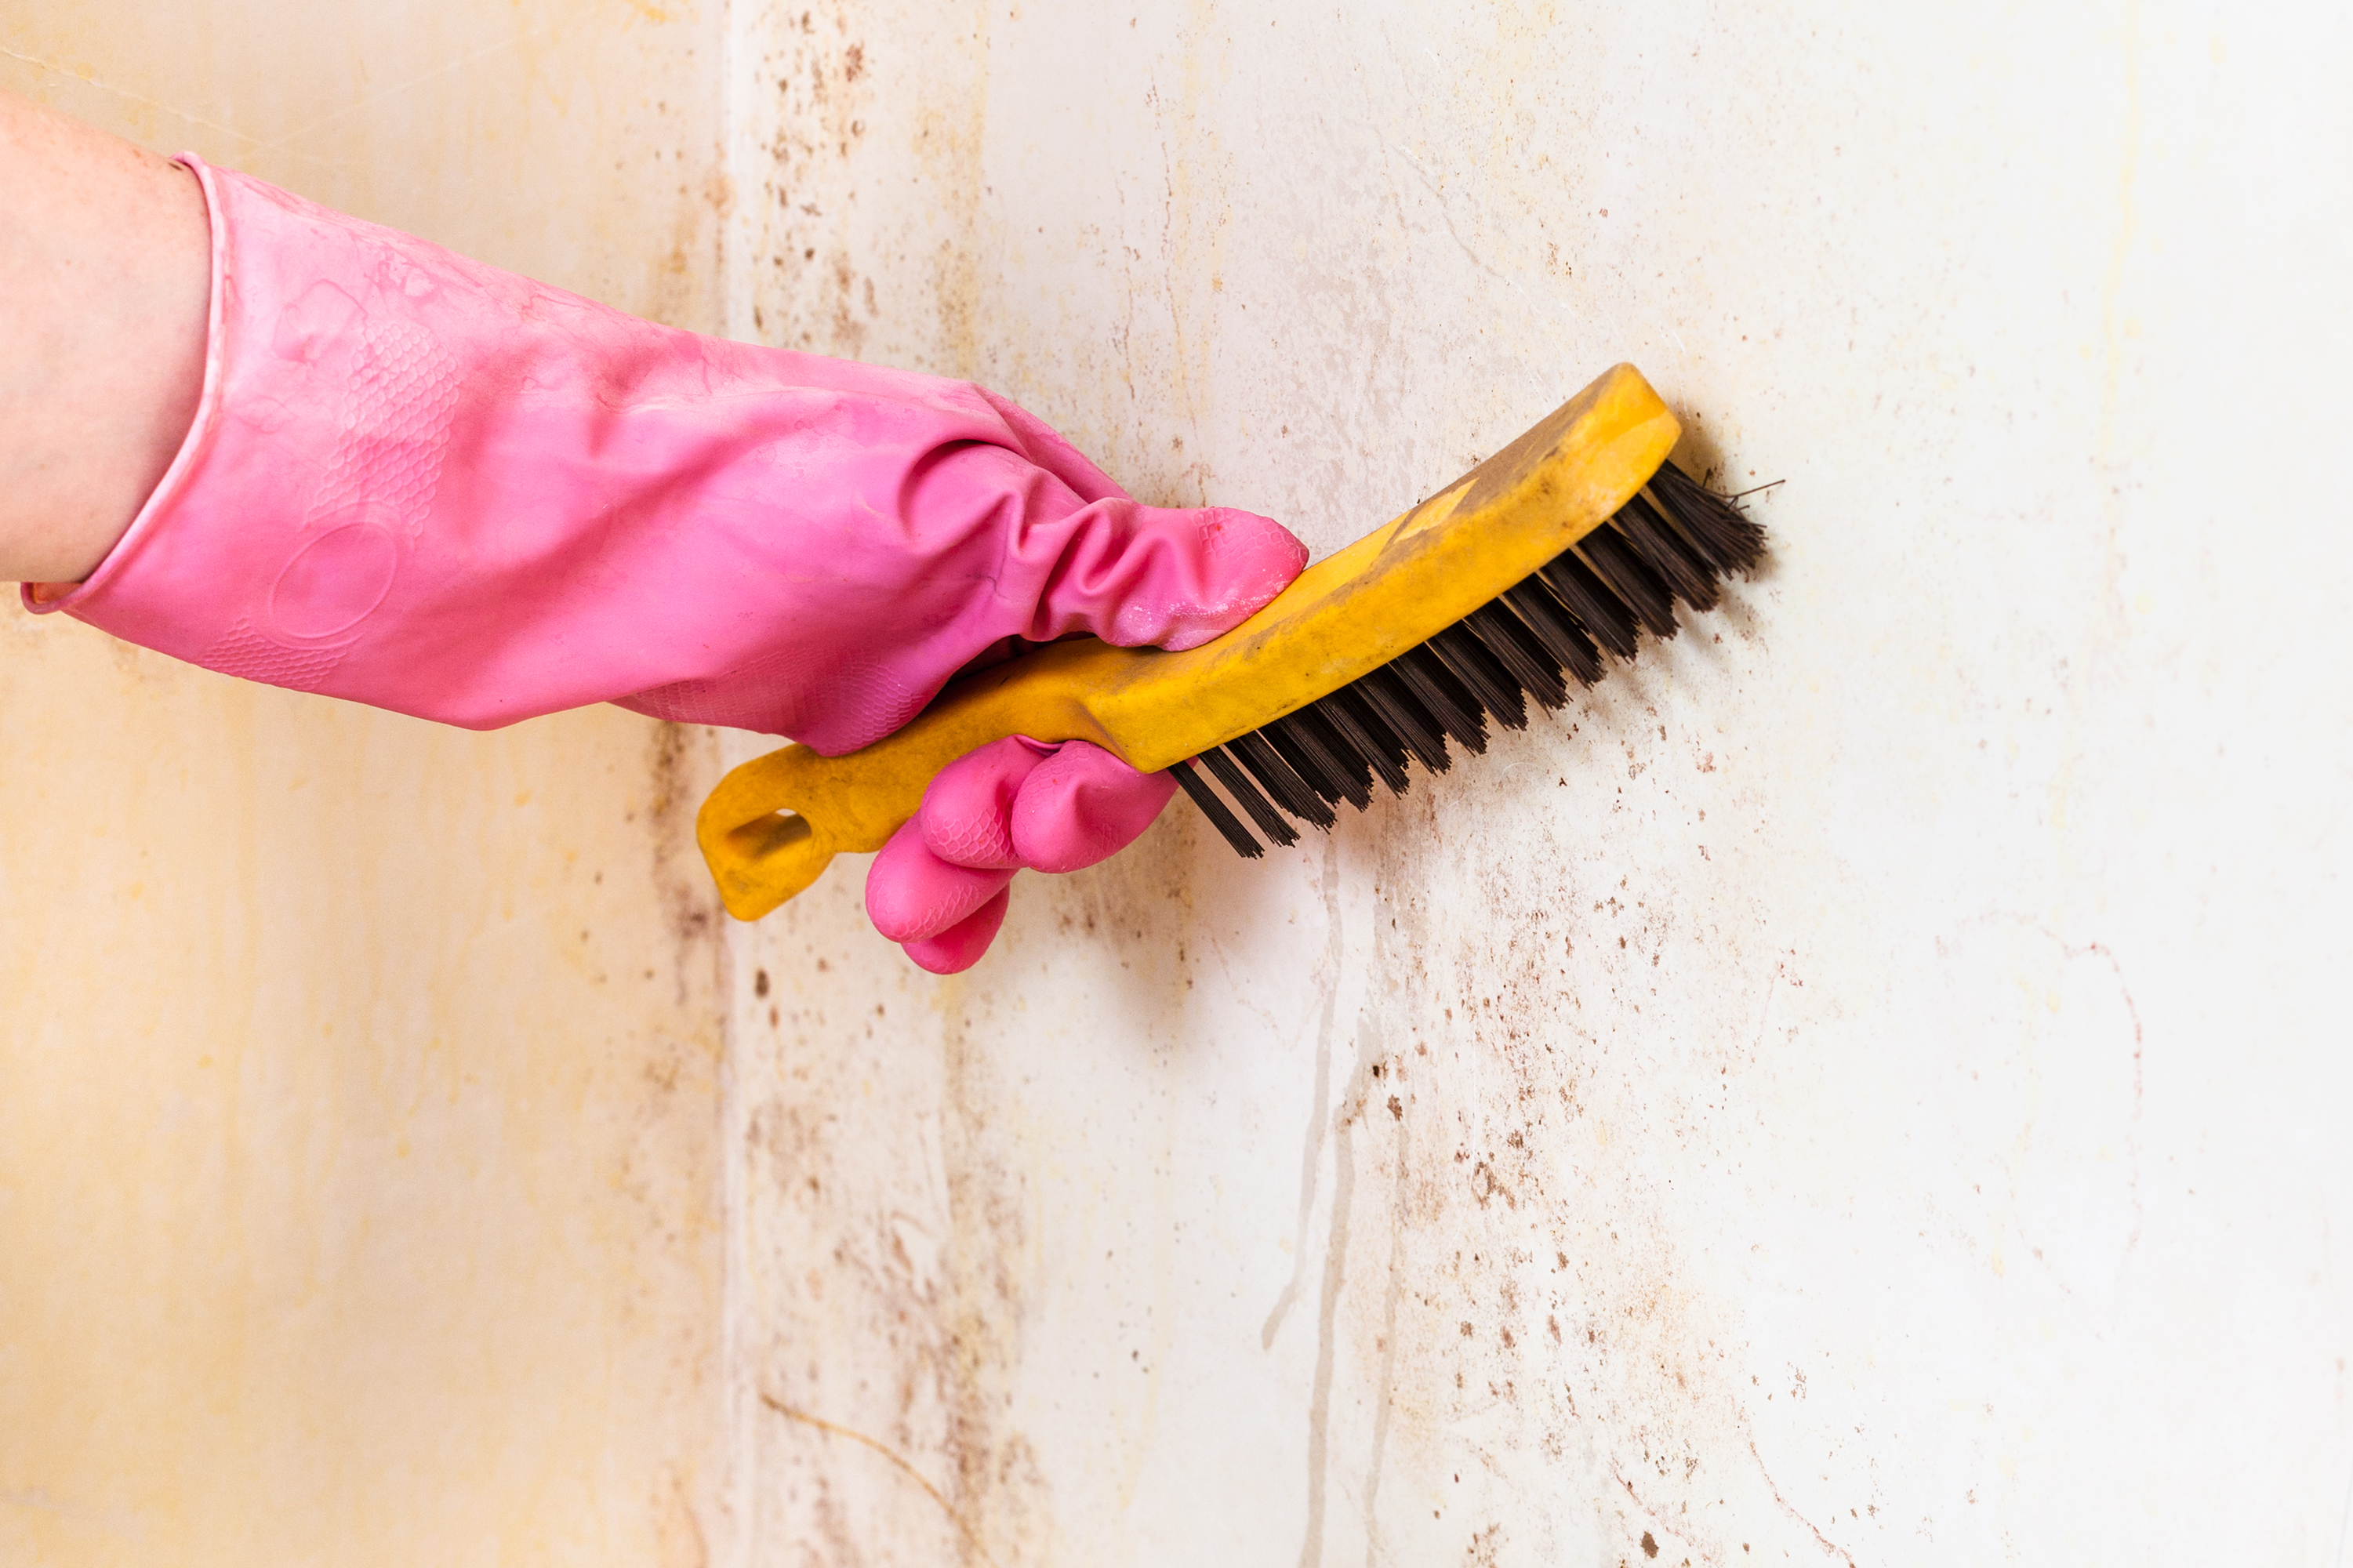 How to Remove Mold from Your Home: A Step-by-Step Guide